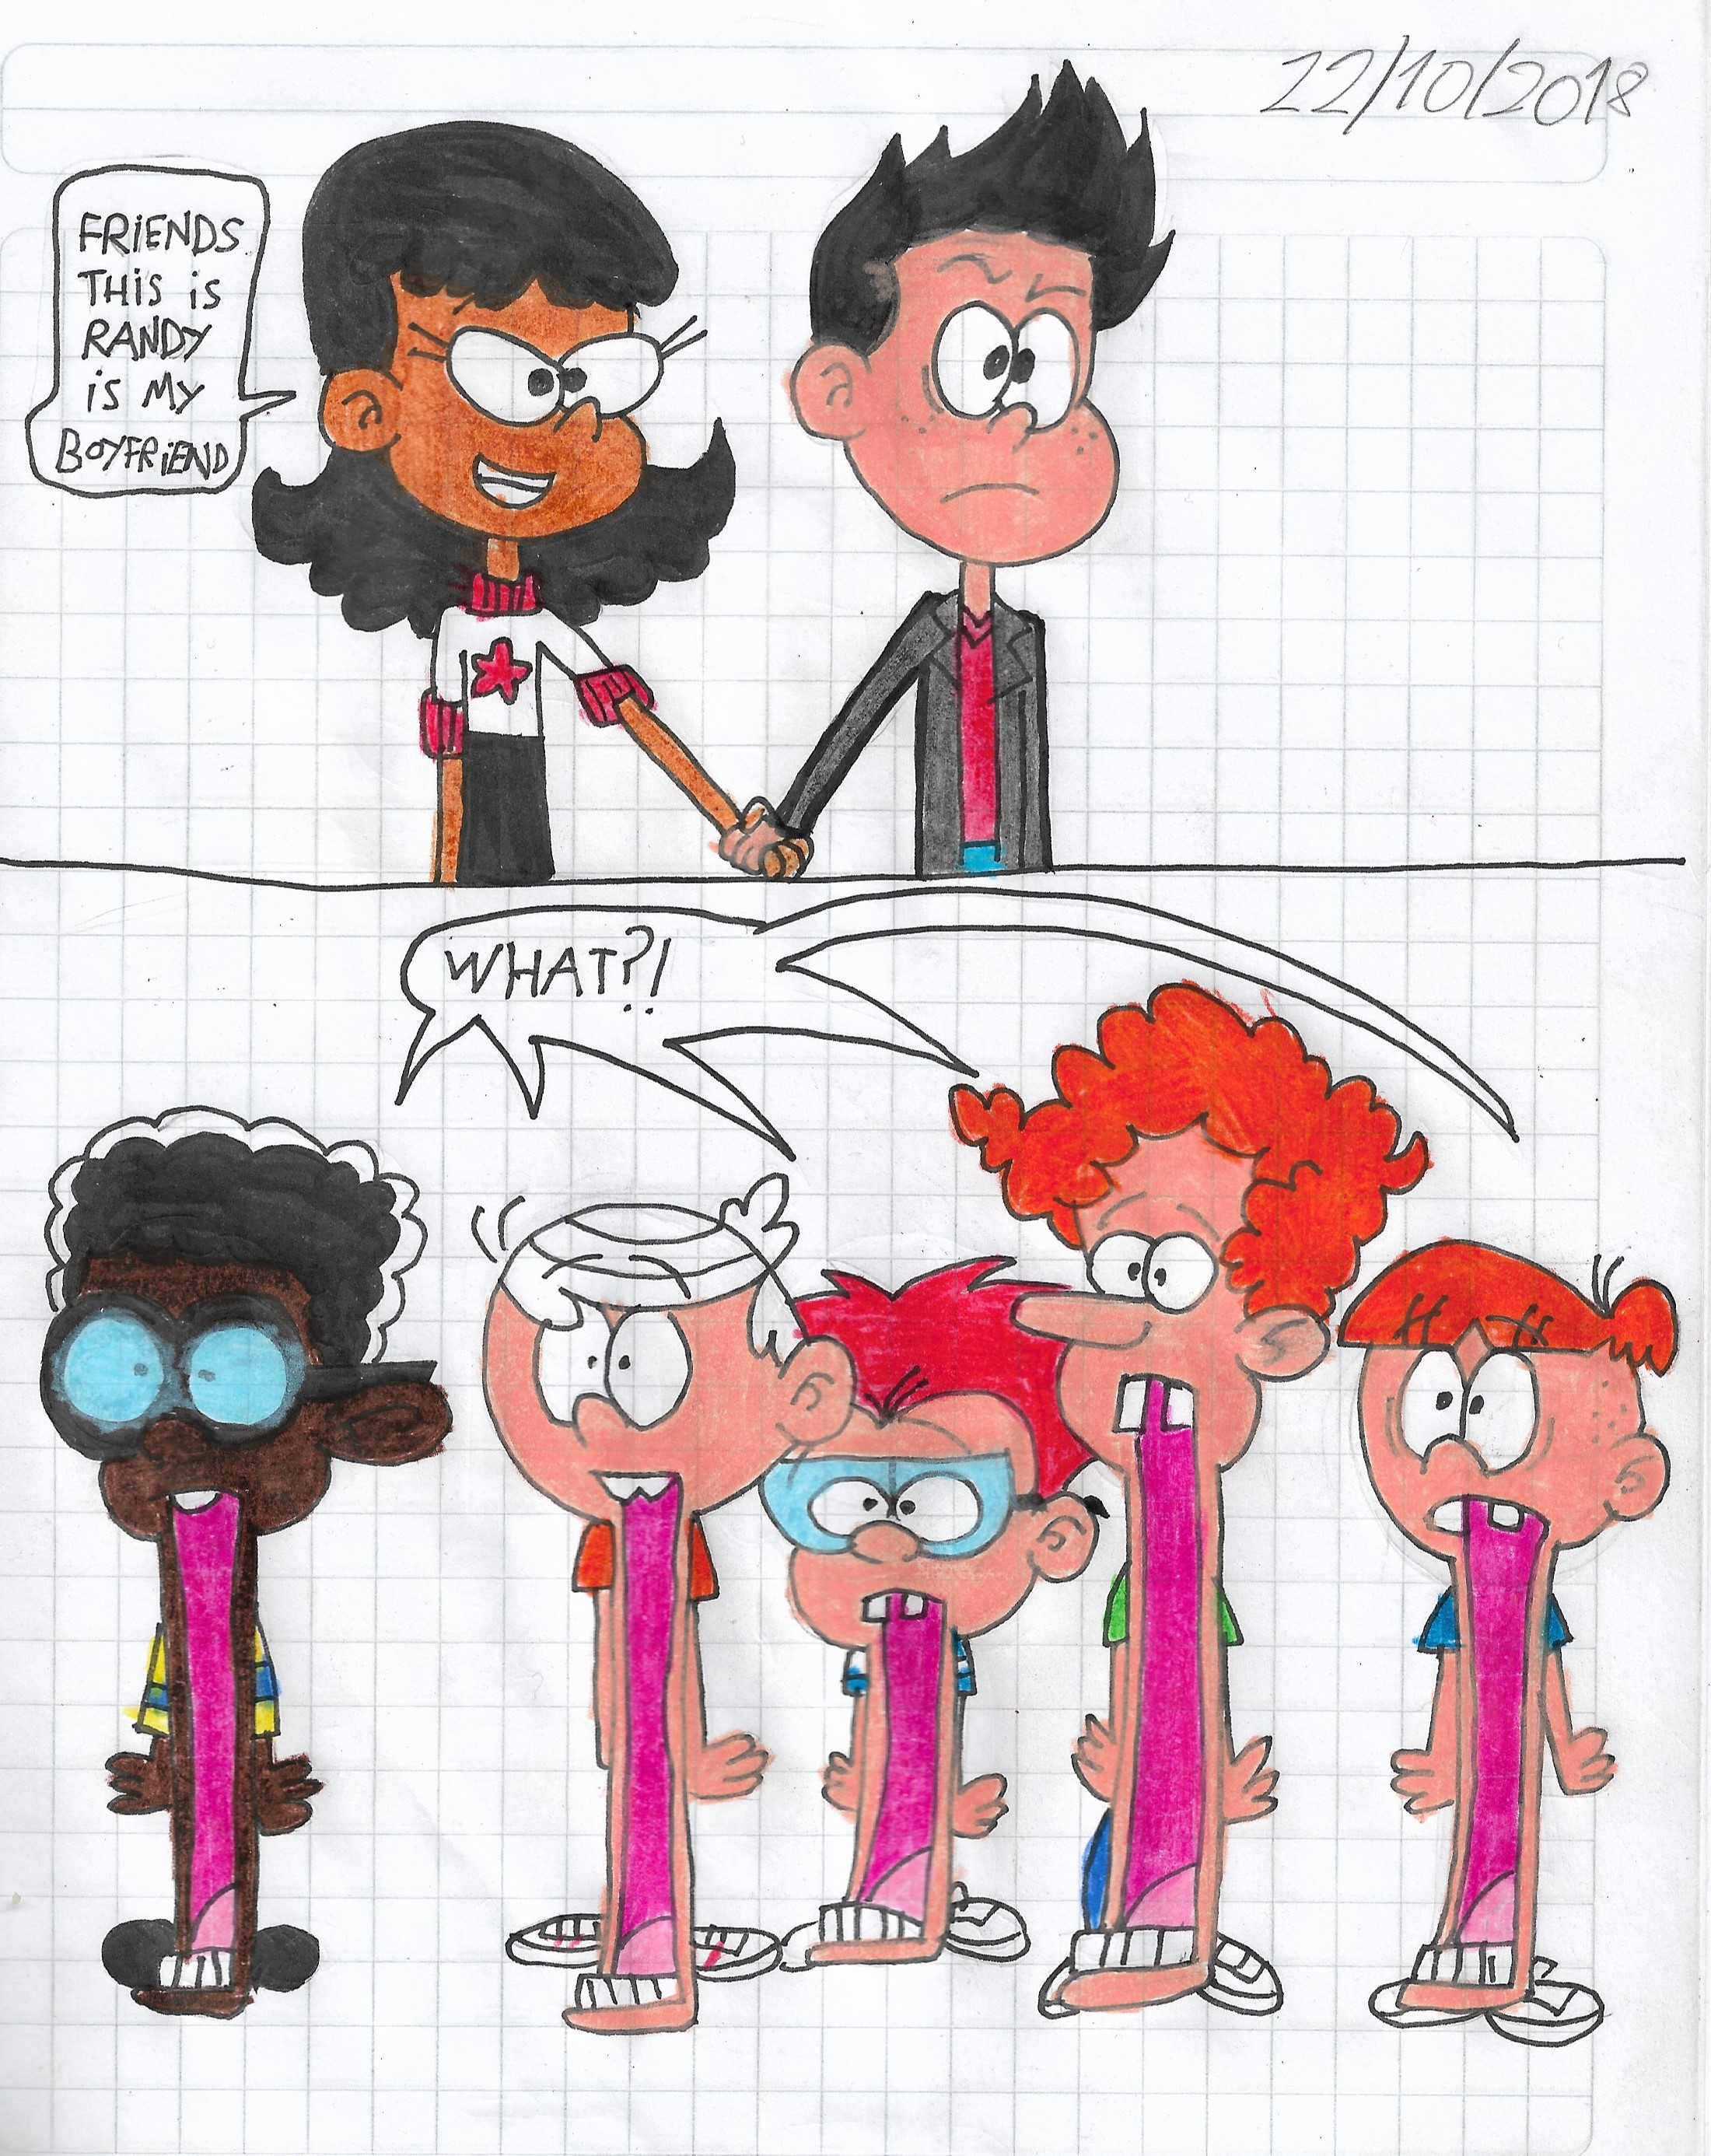 Lincoln And His Friends Meet Randy By Matiriani28 On Deviantart 